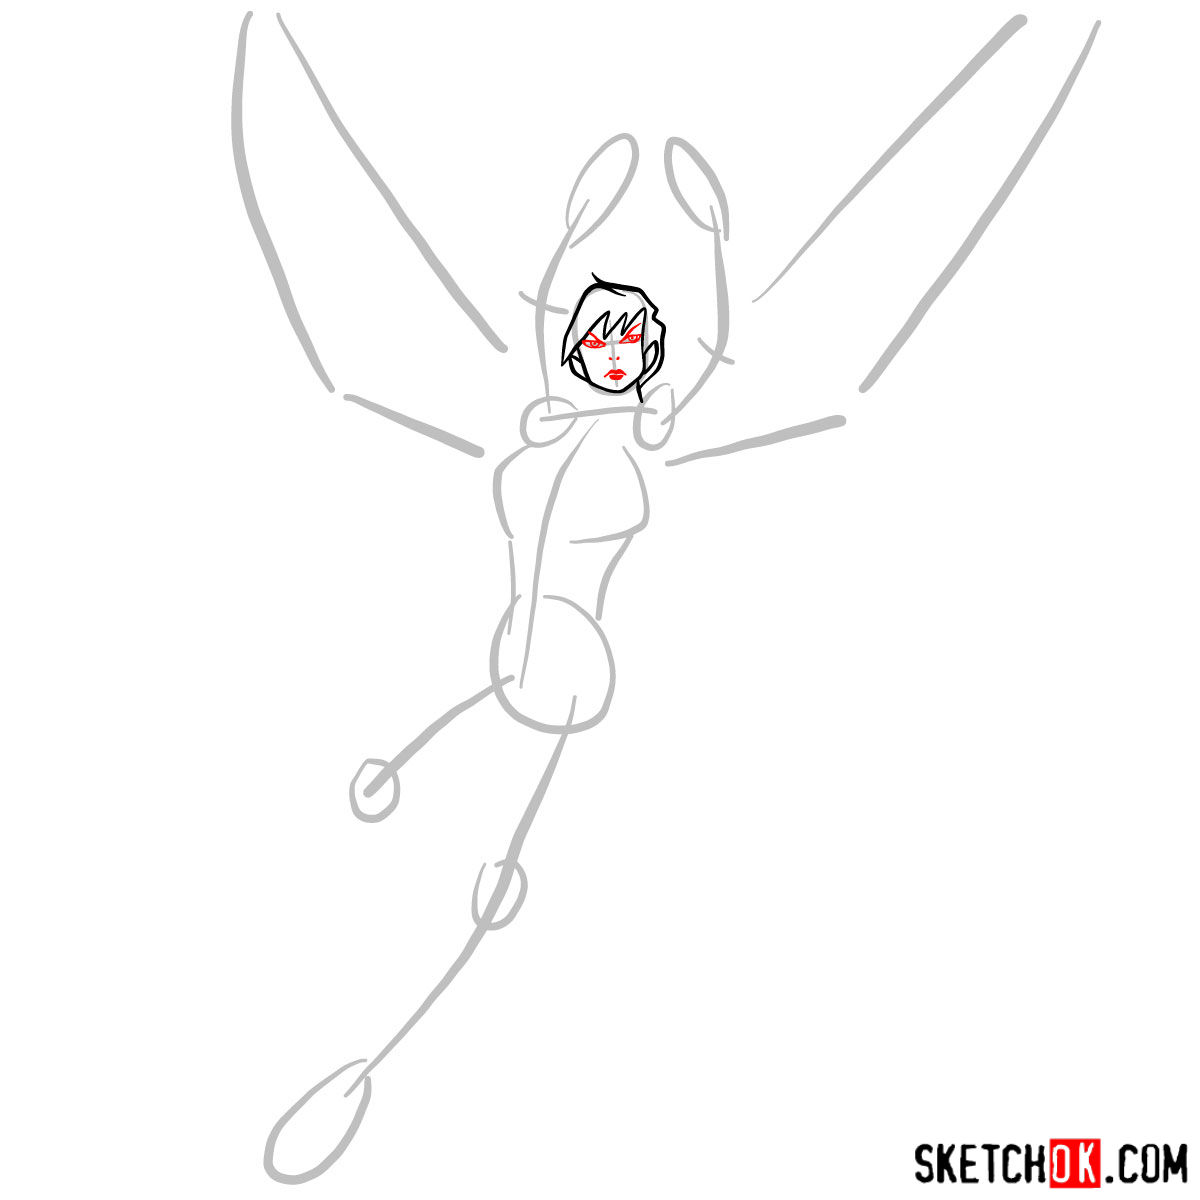 How to draw Wasp, Janet van Dyne from Marvel Comics - step 03